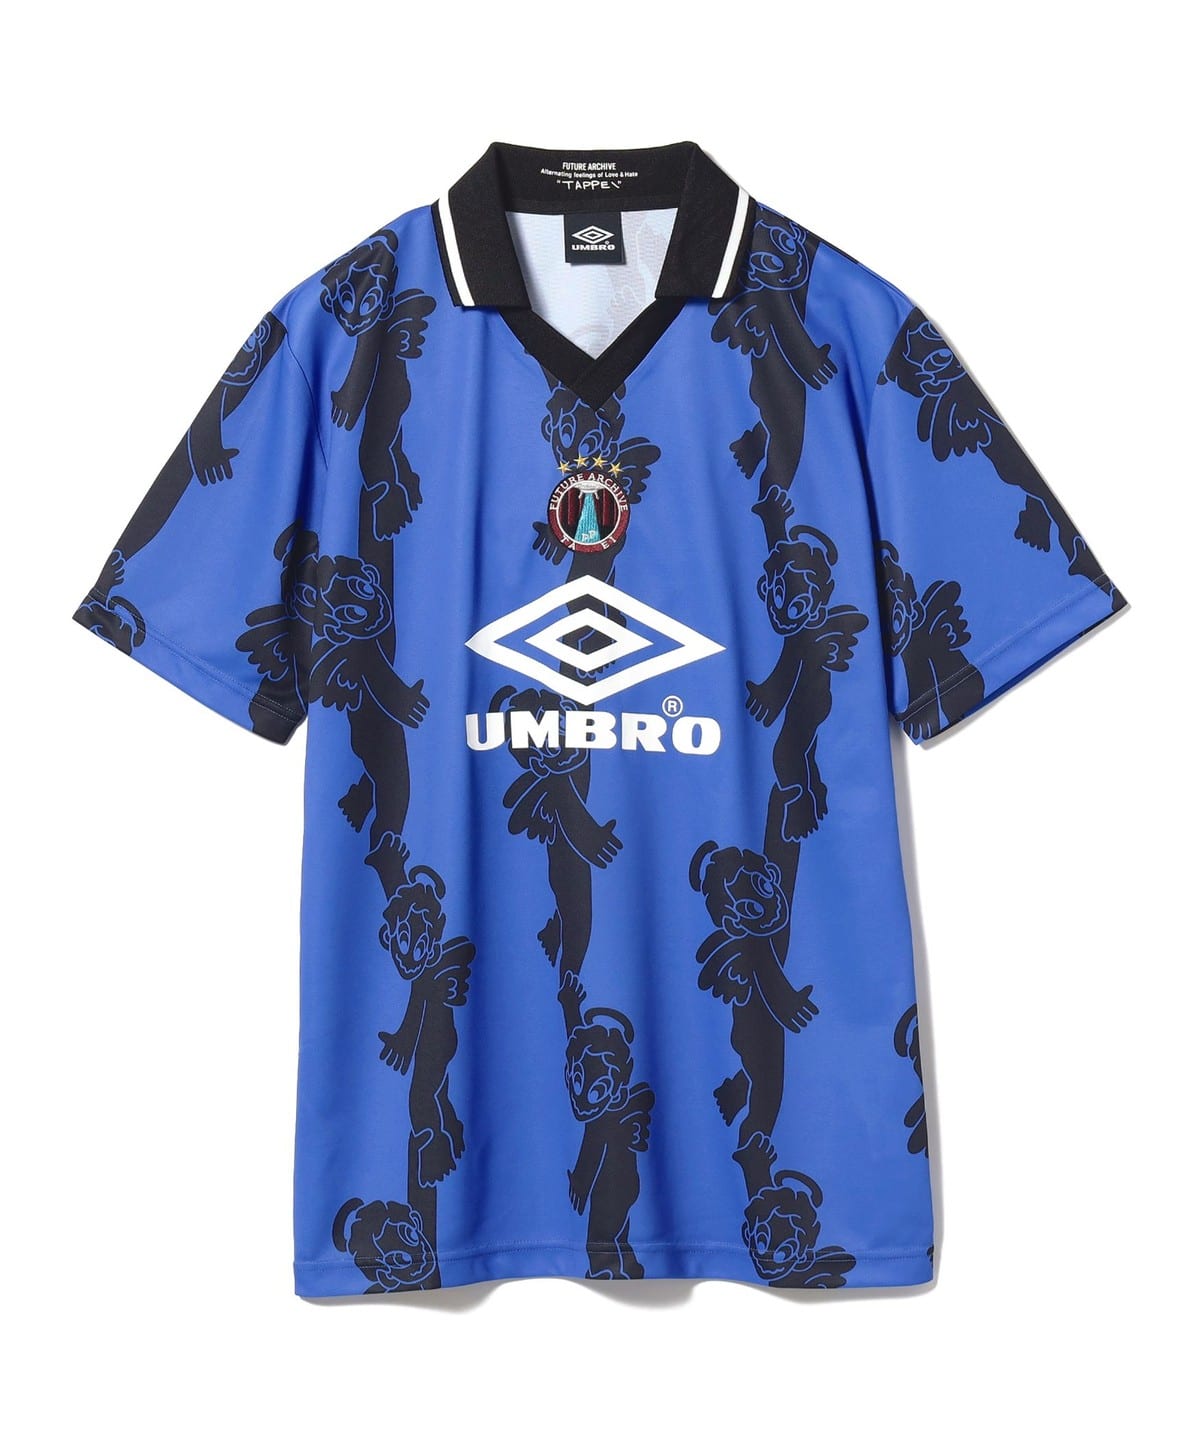 TAPPEI UMBRO FUTURE ARCHIVE Game Shirtトップス